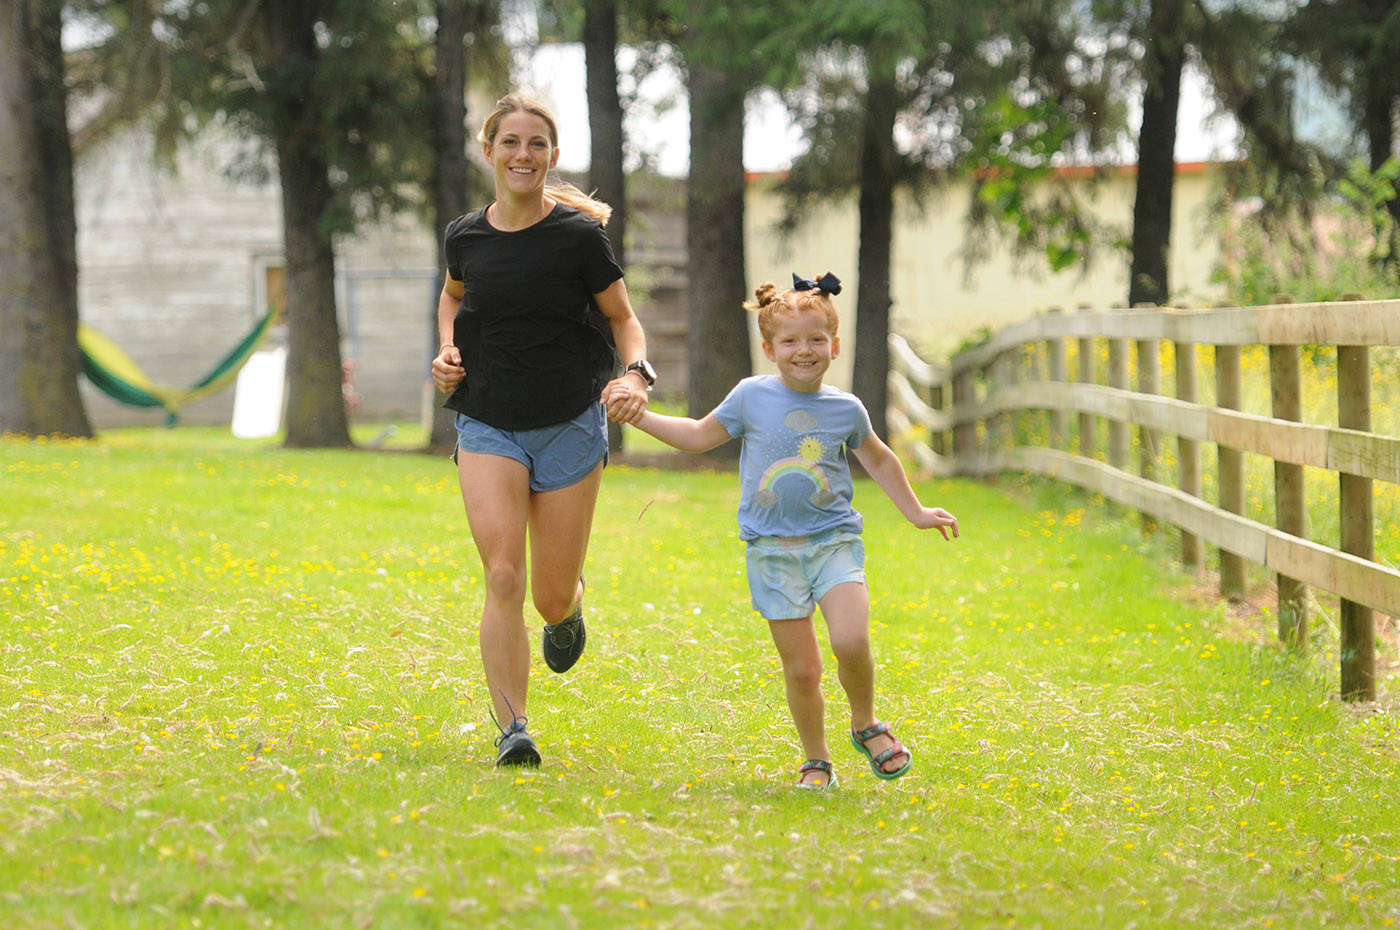 Kalyn Head, nanny to five-year-old Jenny Francis, will be running 100 kilometres for her birthday marathon on July 23. They are seen here on June 4, 2021. (Jenna Hauck/ Chilliwack Progress)